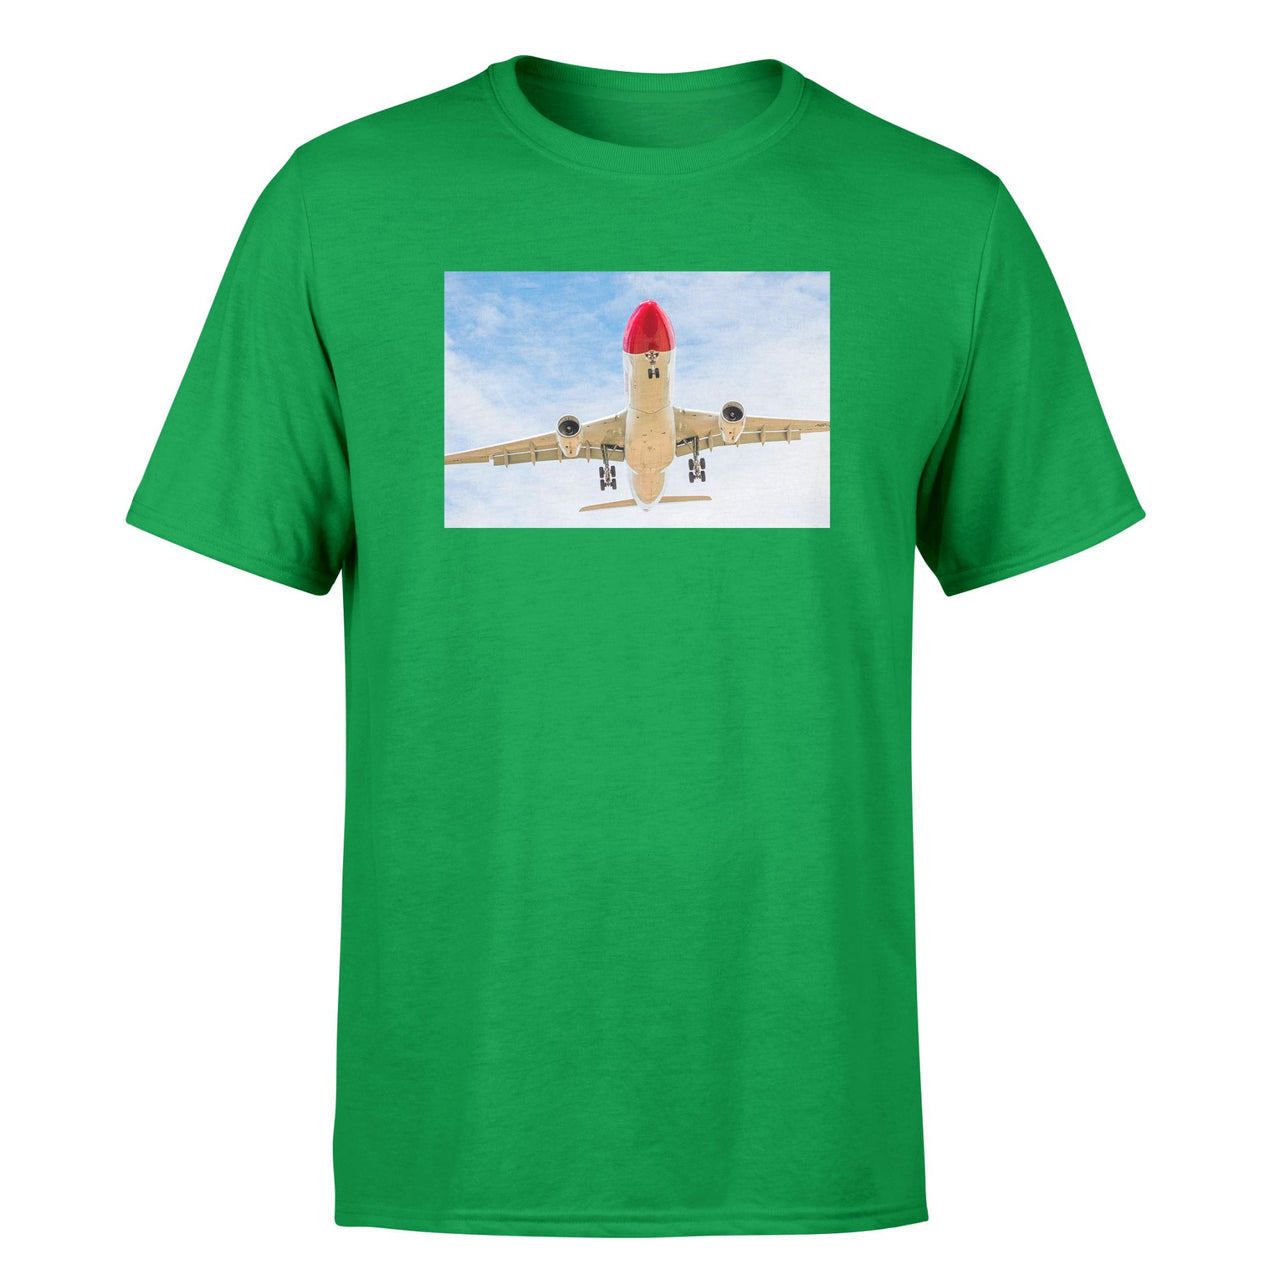 Beautiful Airbus A330 on Approach Designed T-Shirts